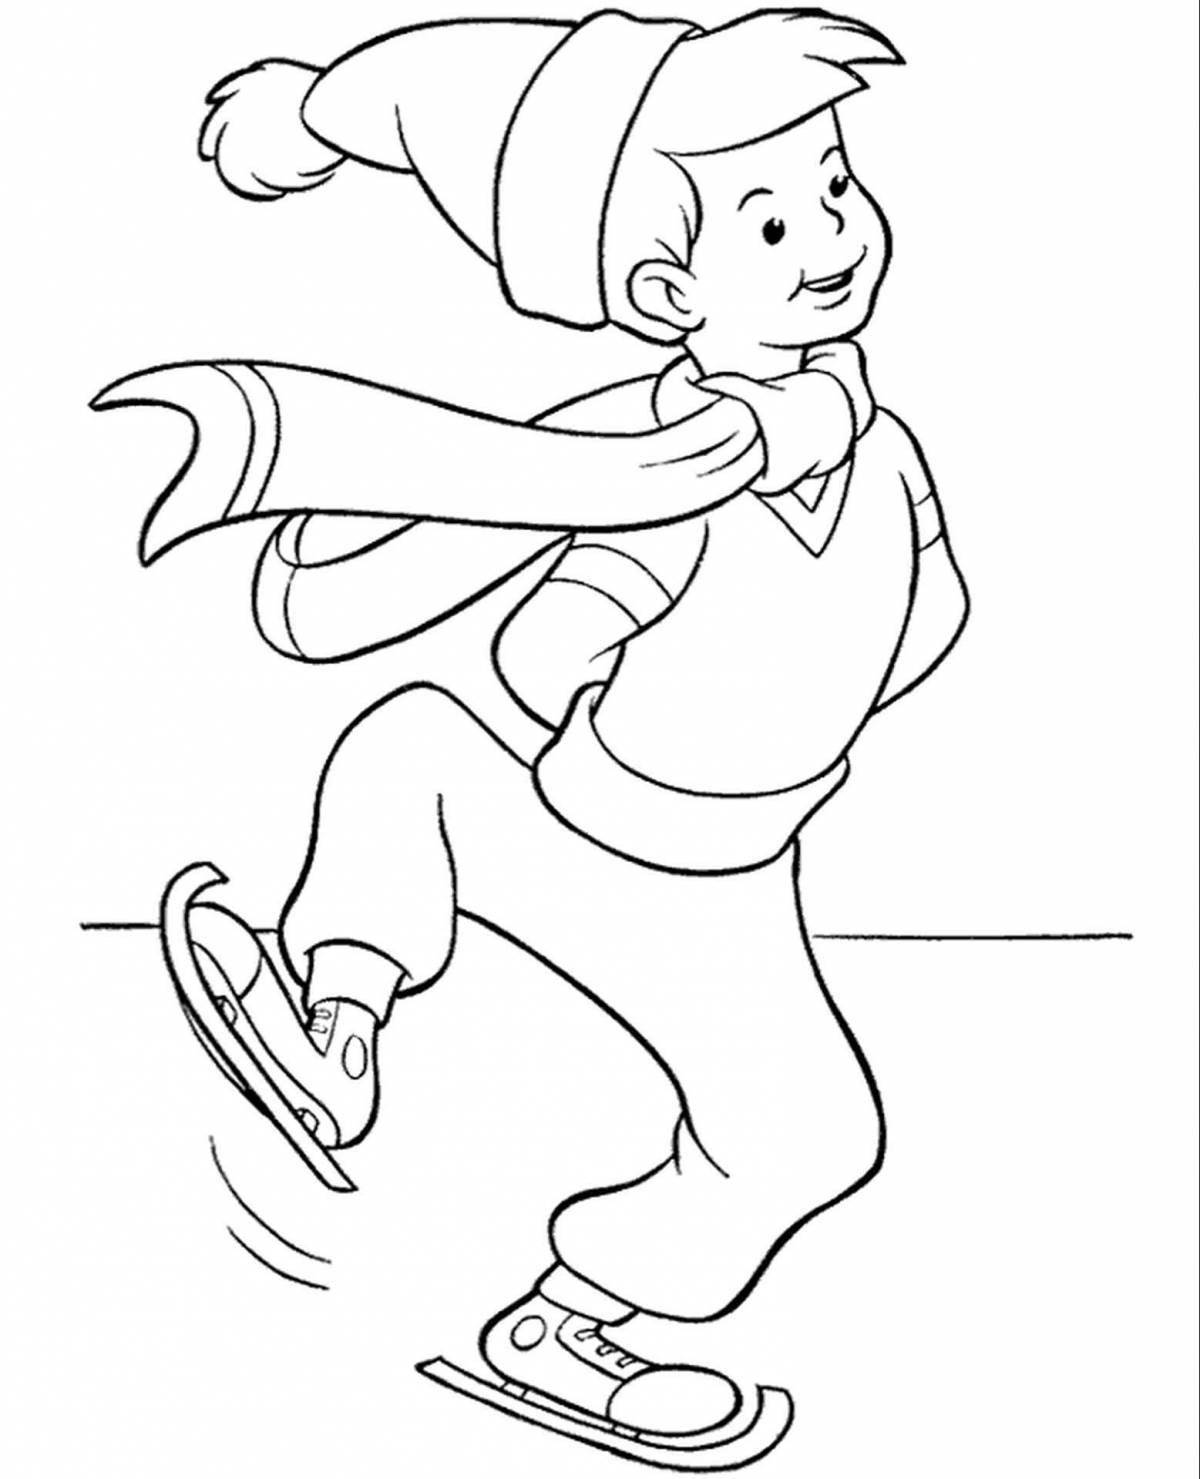 A fun coloring book for kids on skates